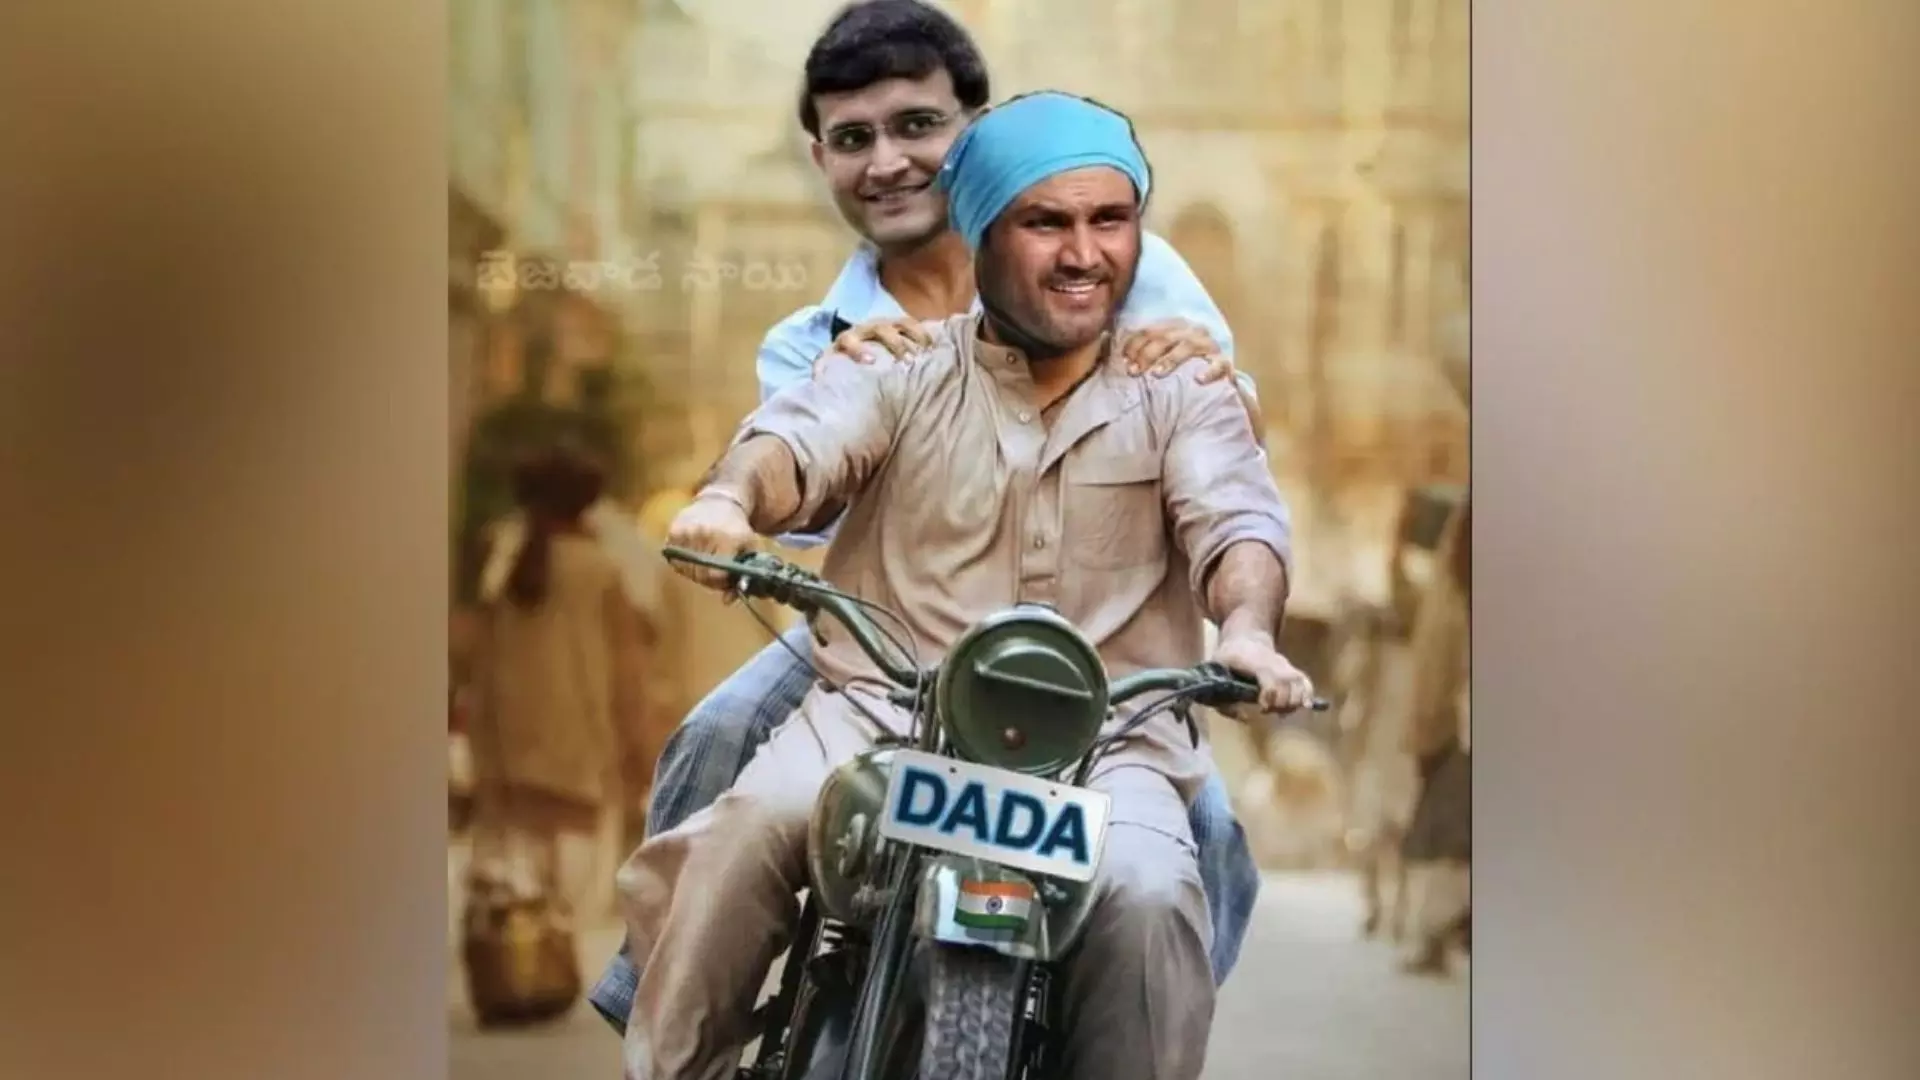 Virendra Sehwag Birthday wishes to Sourav Ganguly By Sharing RRR Movie Poster | Cricket News Today